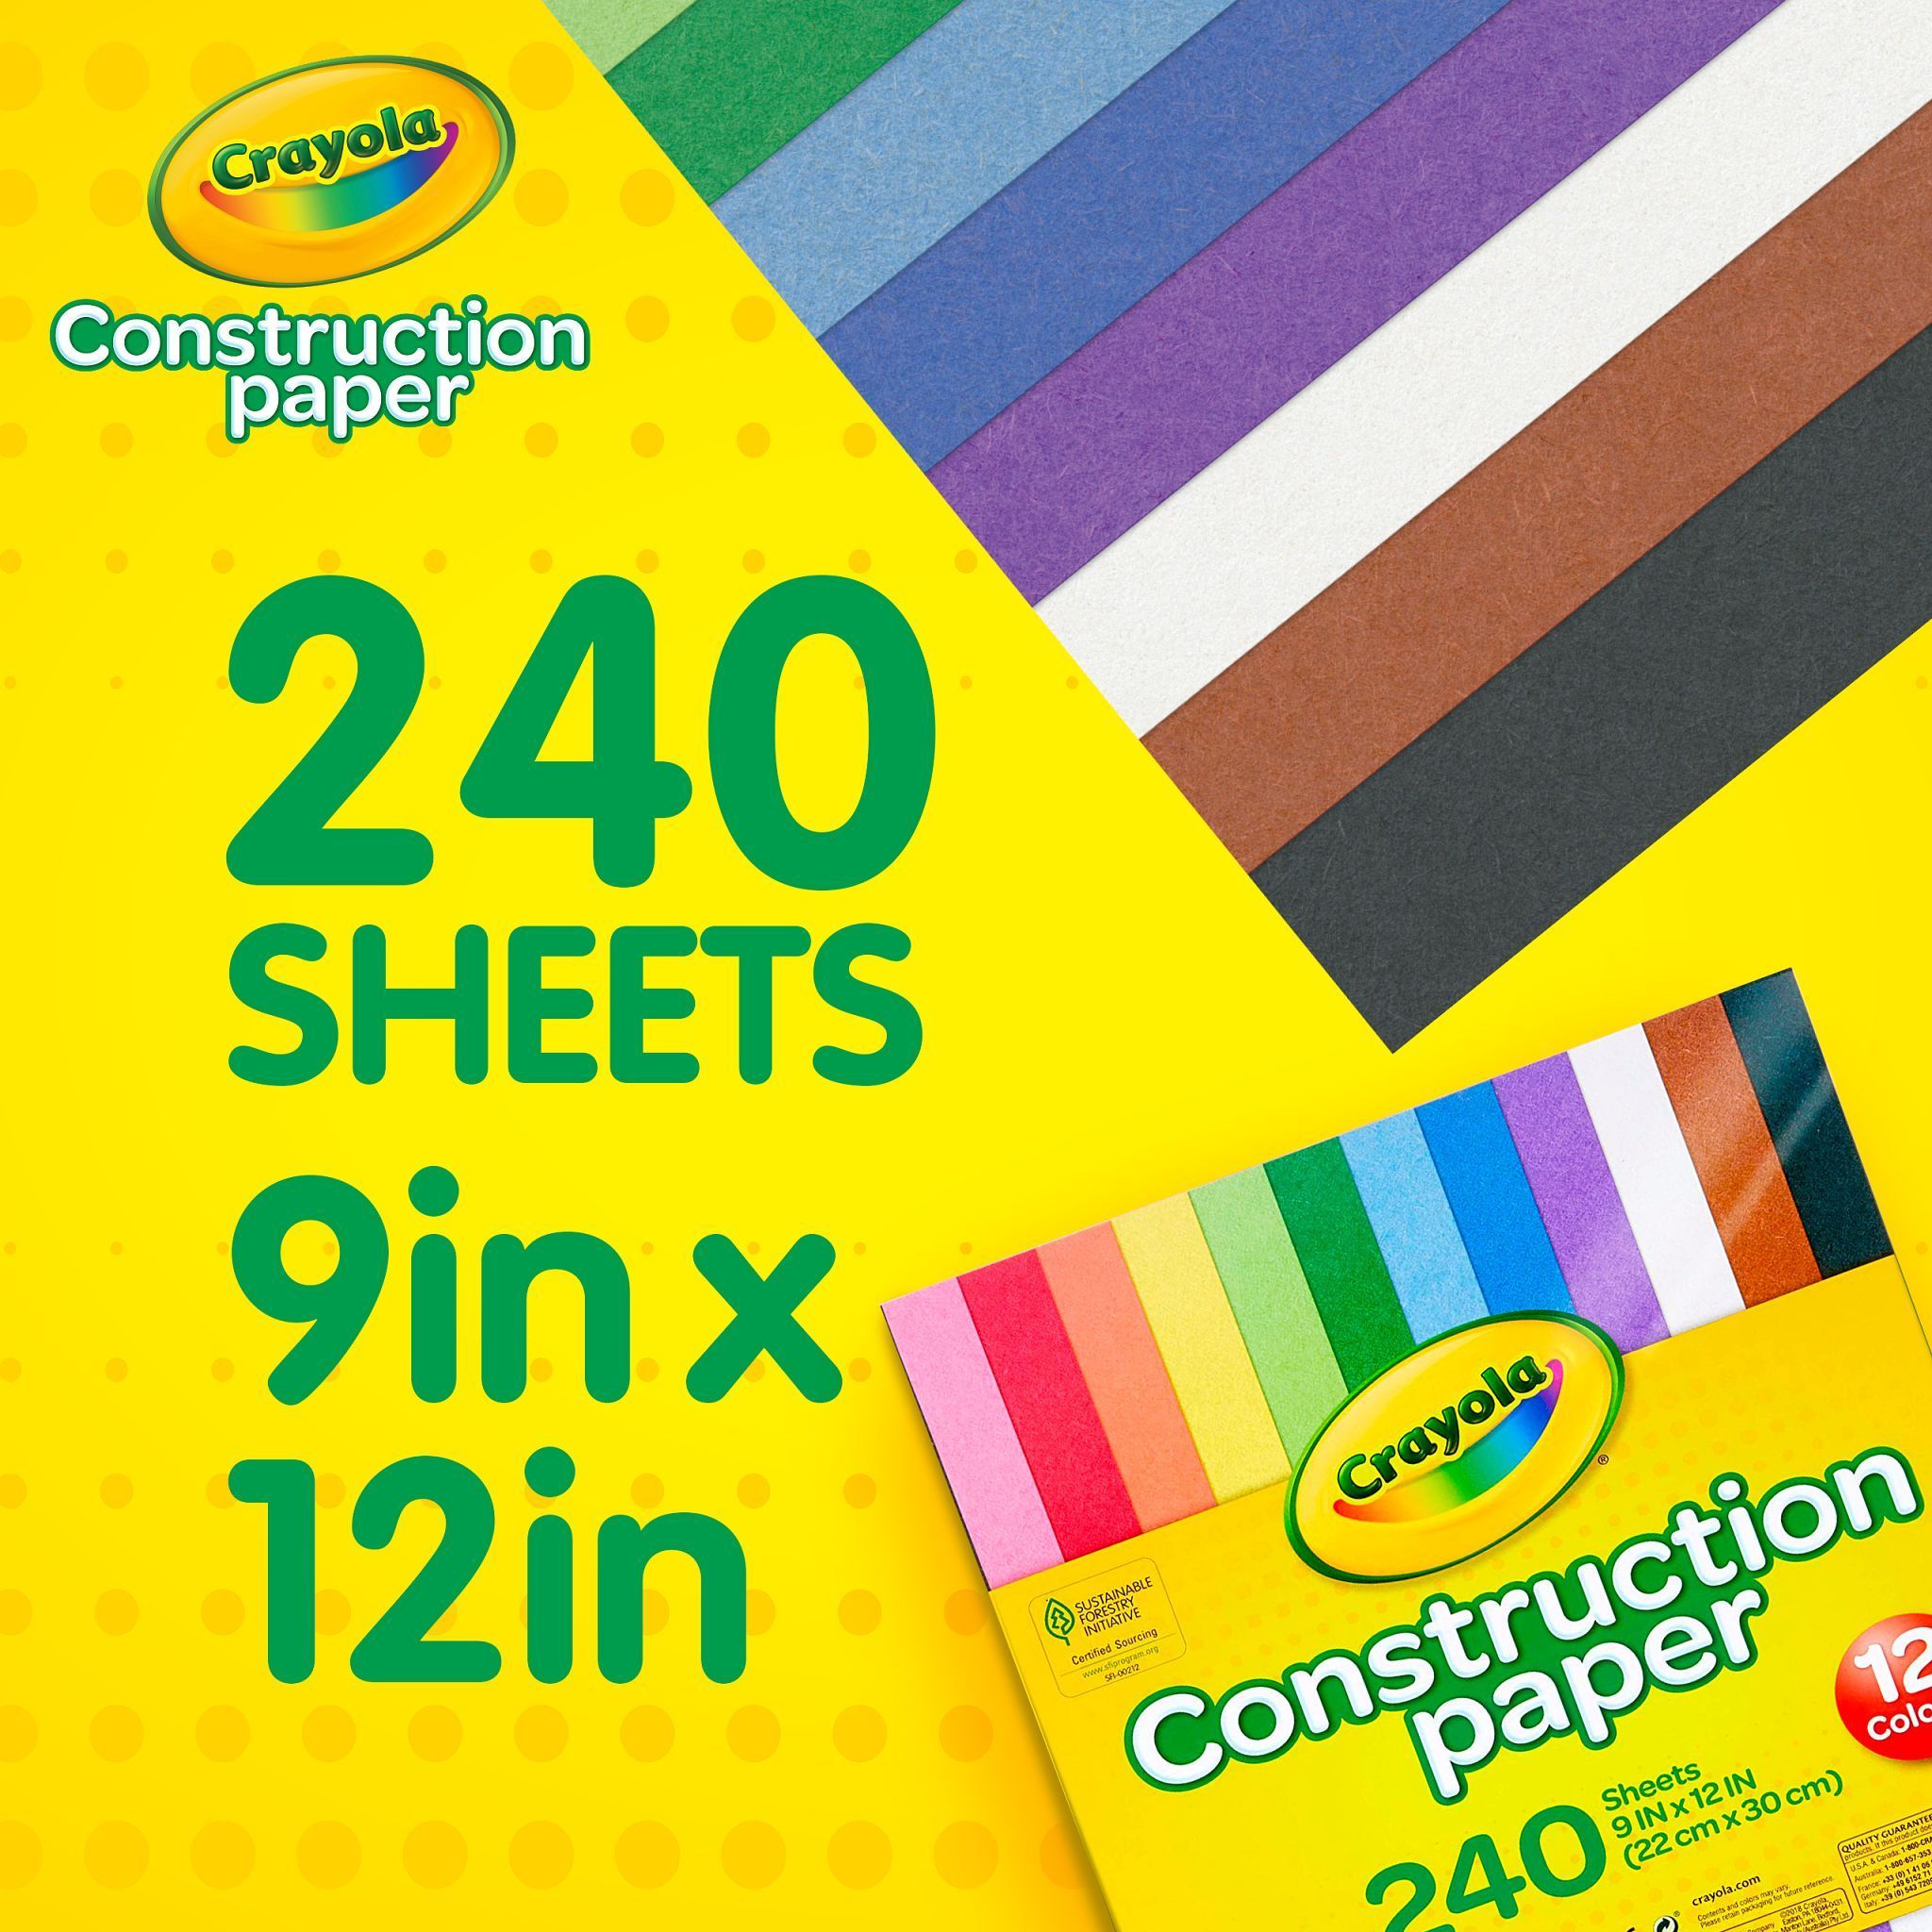 Crayola Construction Paper in 10 Assorted Colors, School Supplies, Beginner Child, 240 Sheets - image 3 of 8